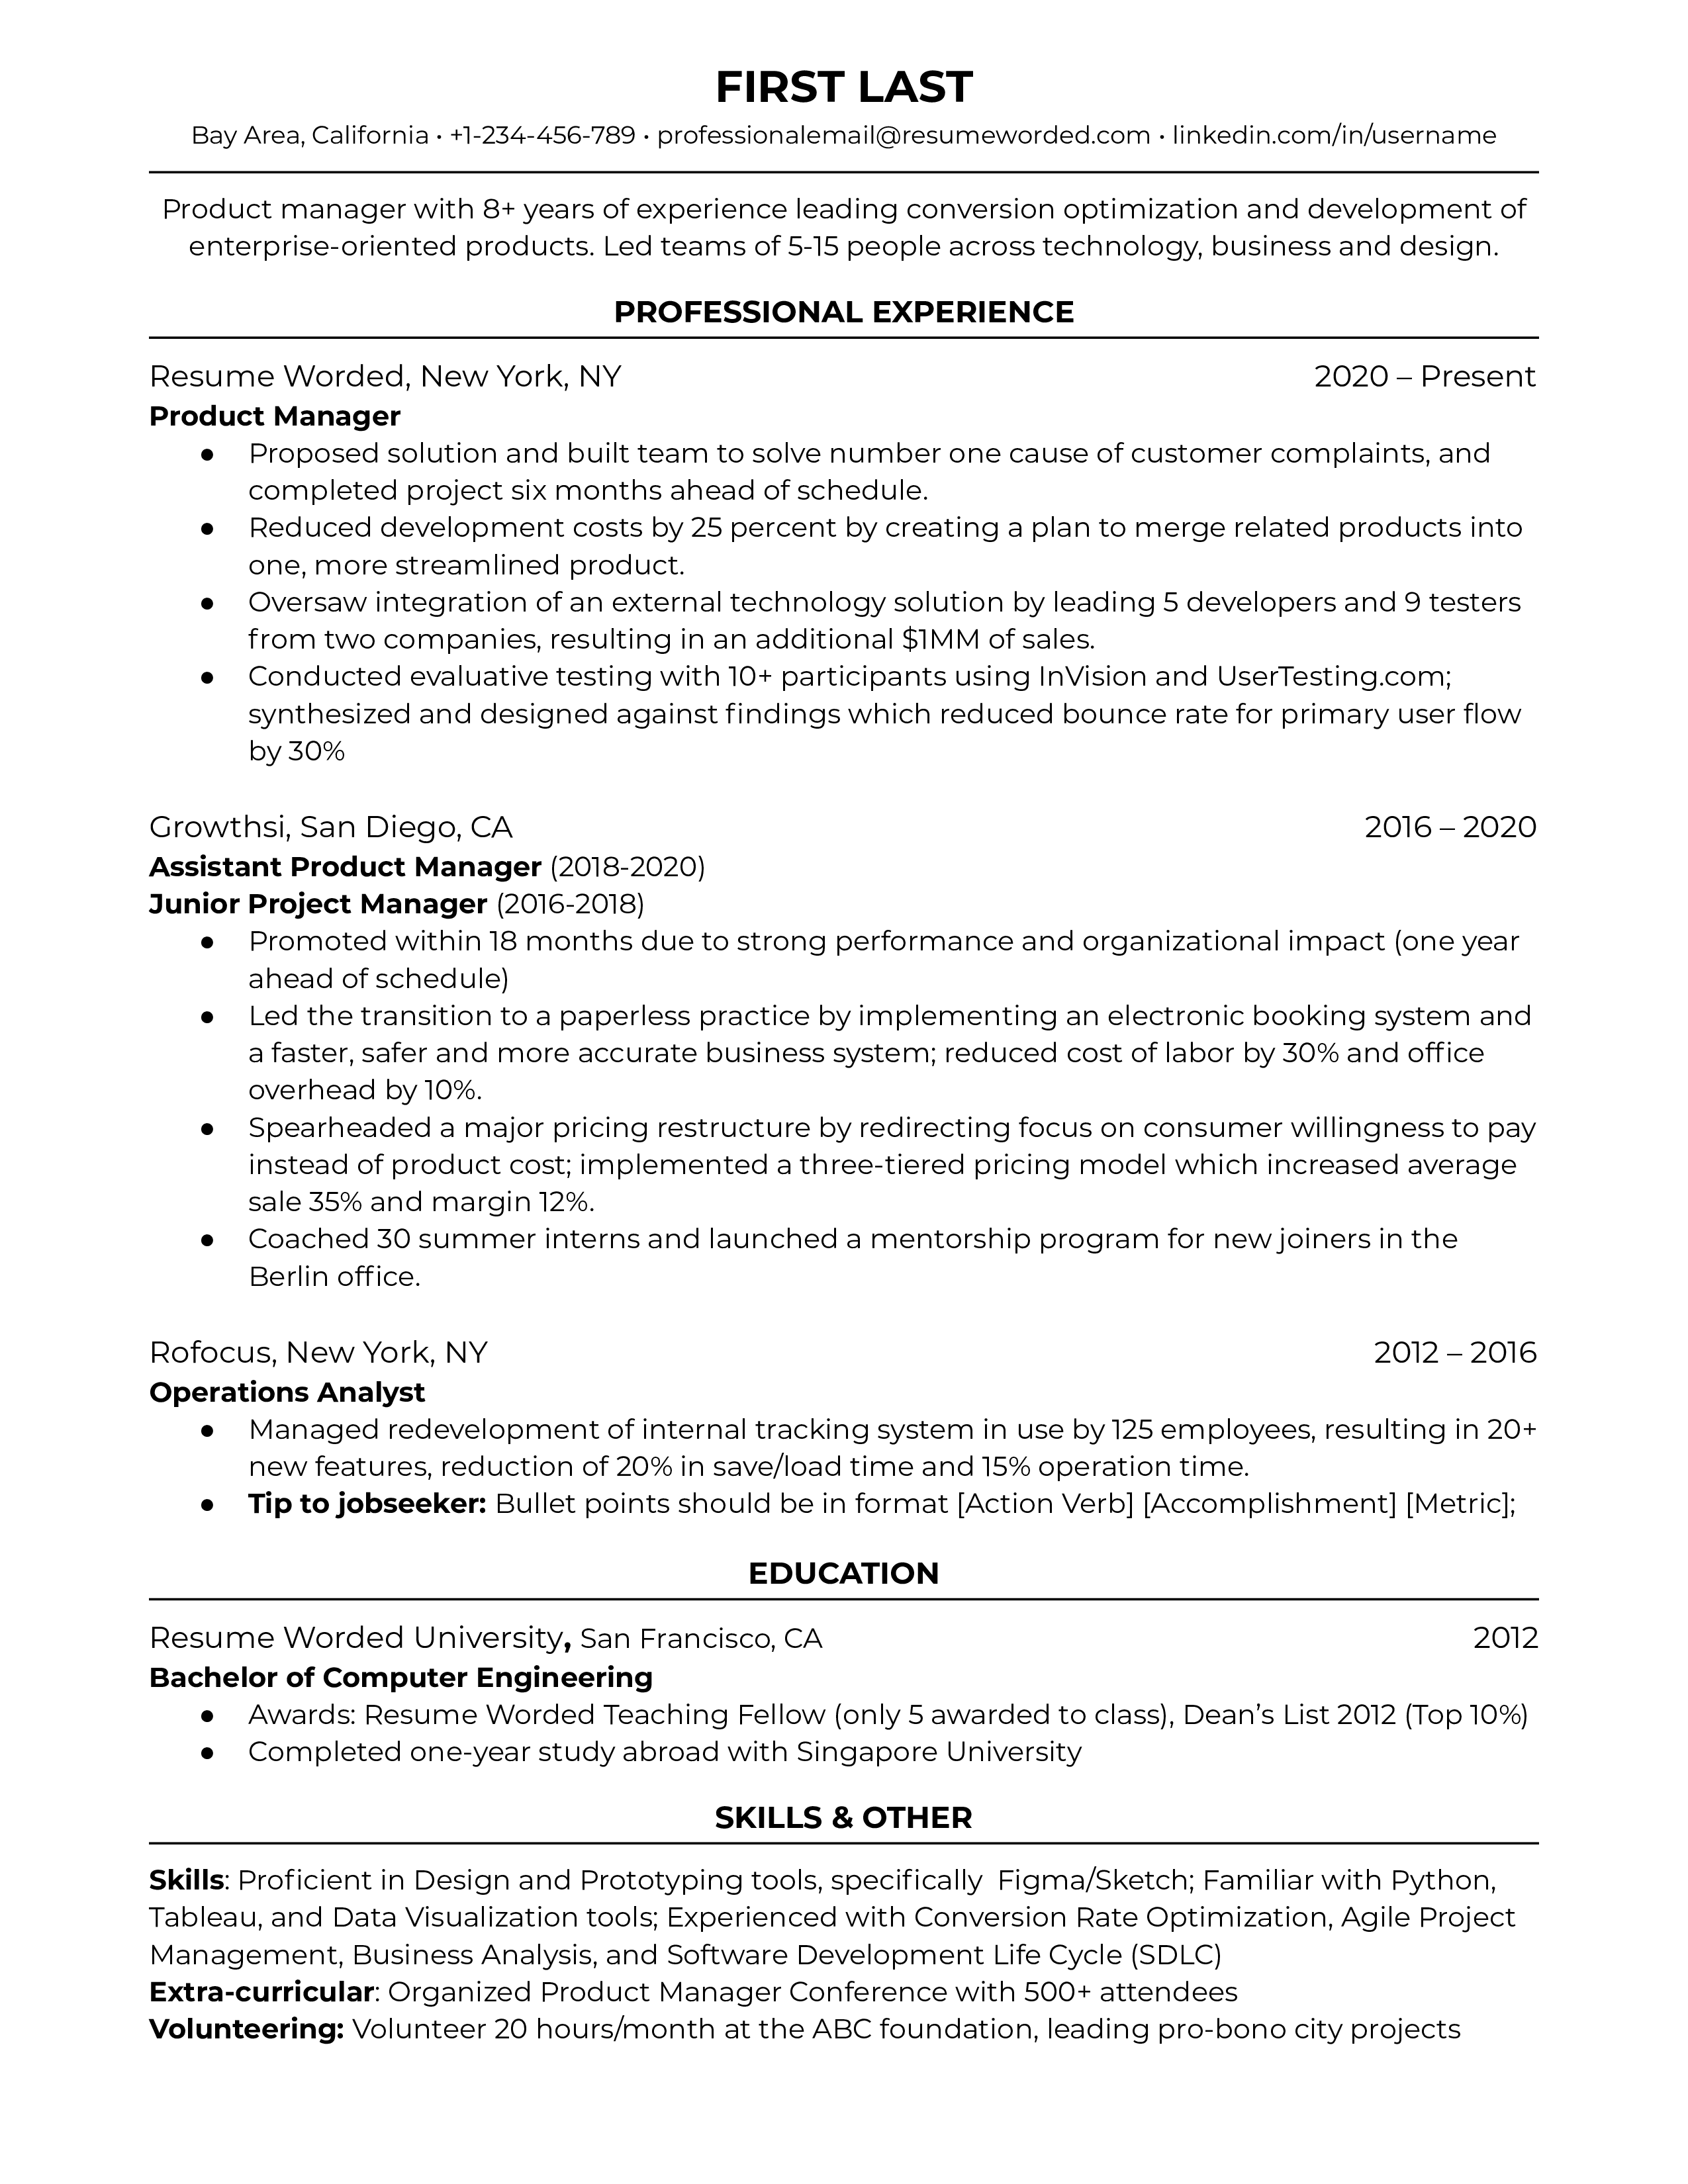 A resume for a product manager with a bachelor's degree in computer engineering and over 8 years experience in product development.